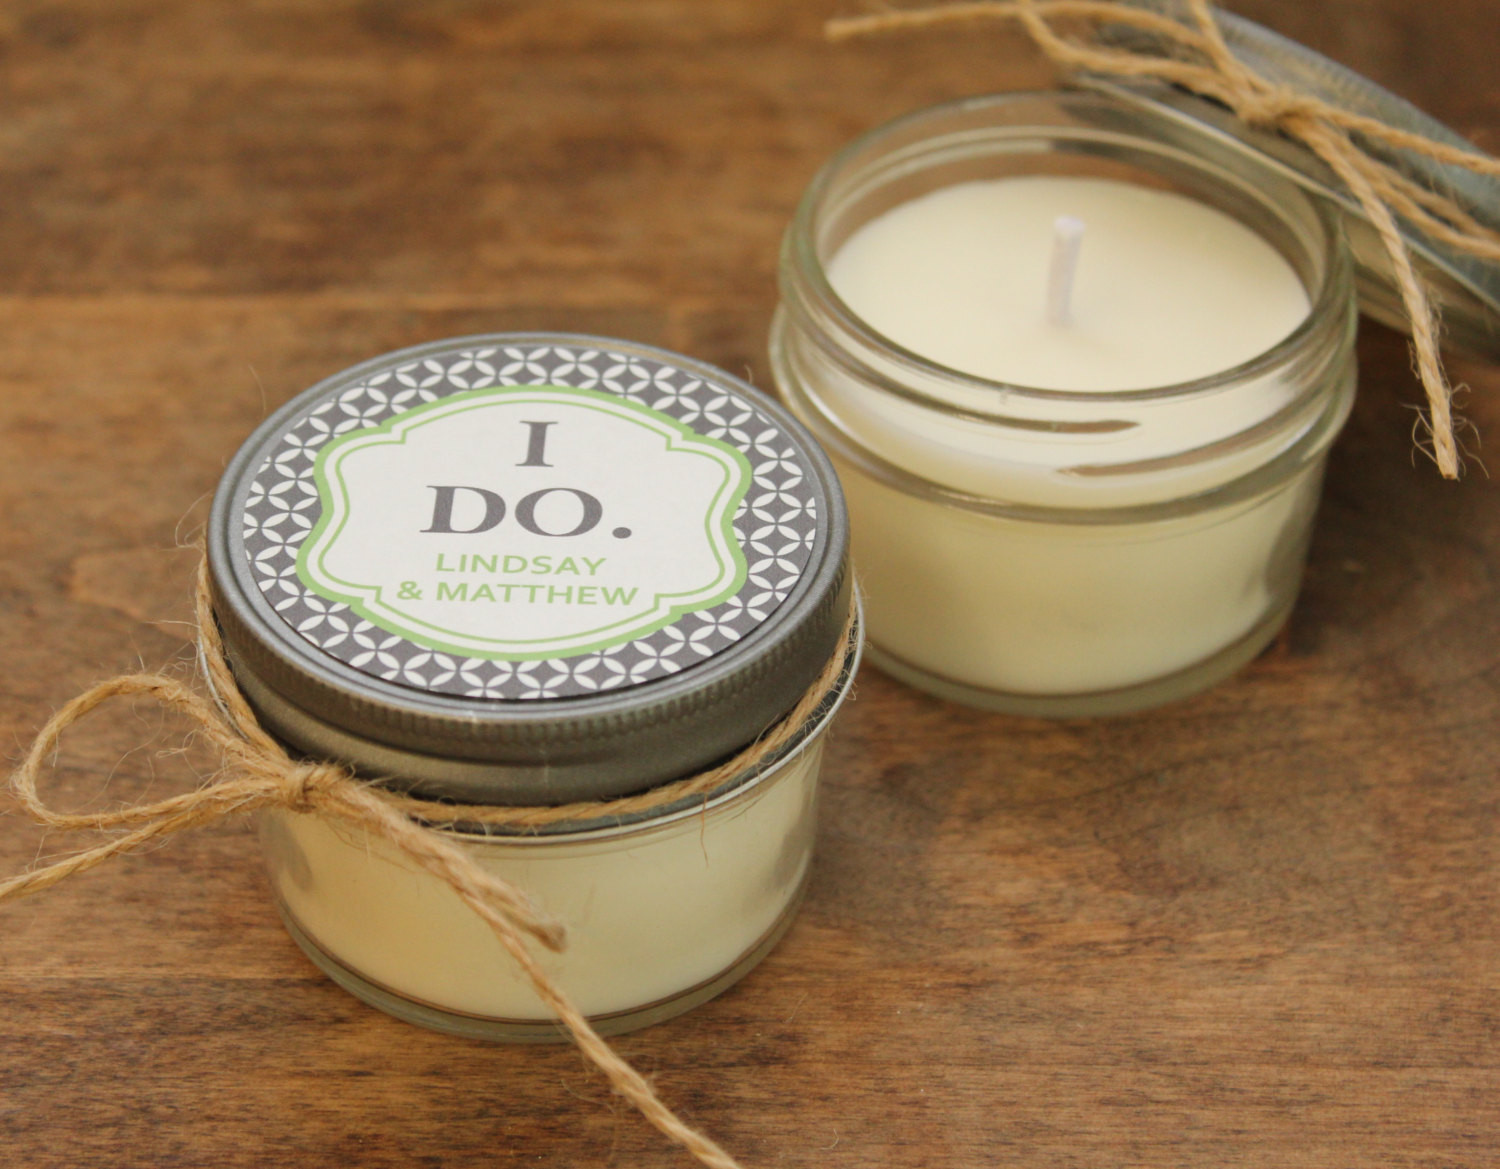 Wedding Favor Candles
 Set of 12 4 oz Soy Candle Wedding Favors I Do Label by